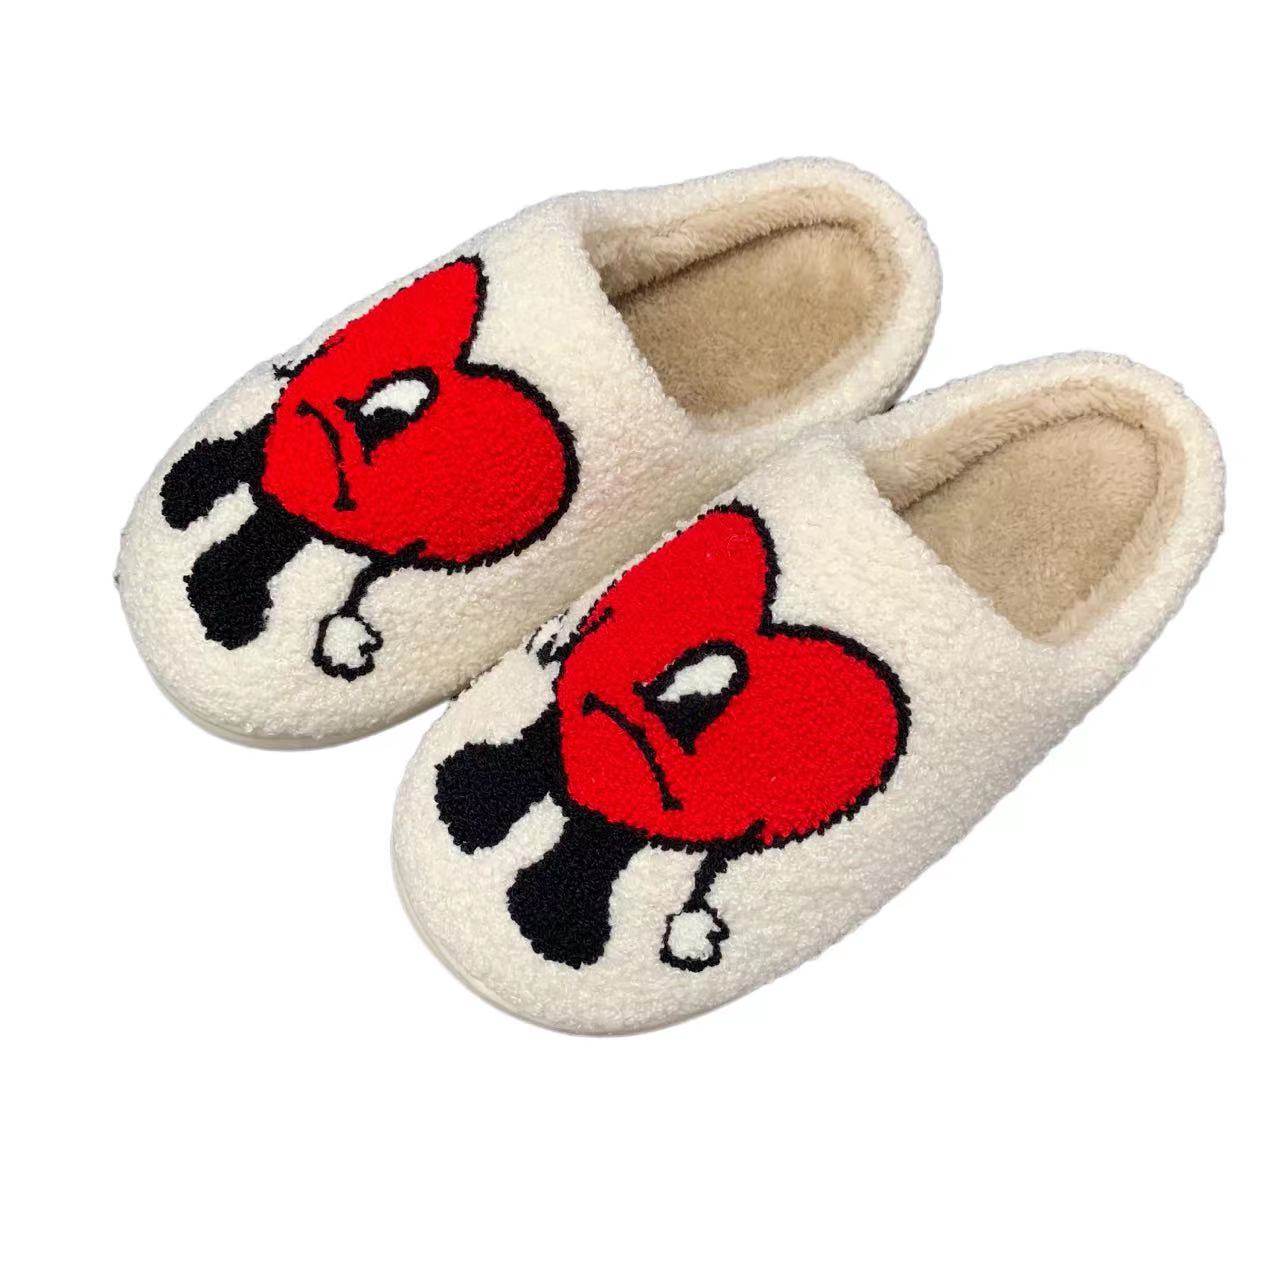 For Kids Fashion Cute Bad Rabbit And Bunny Cartoon Love Pattern Embroidery Slippers Winter Warm Indoor Bedroom Shoes